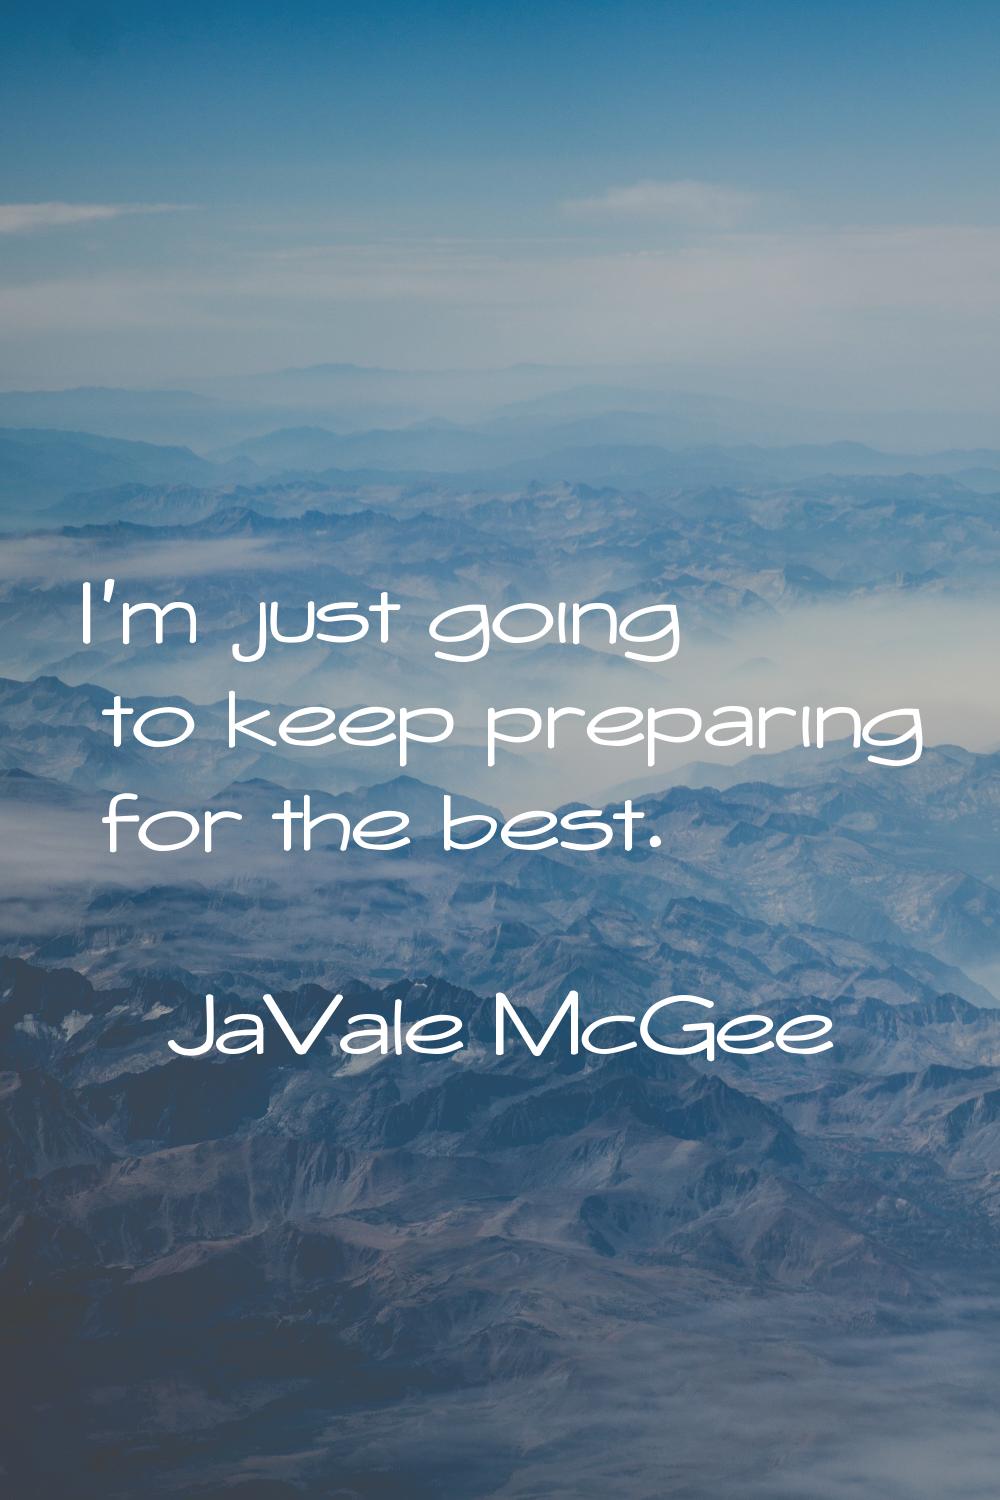 I'm just going to keep preparing for the best.